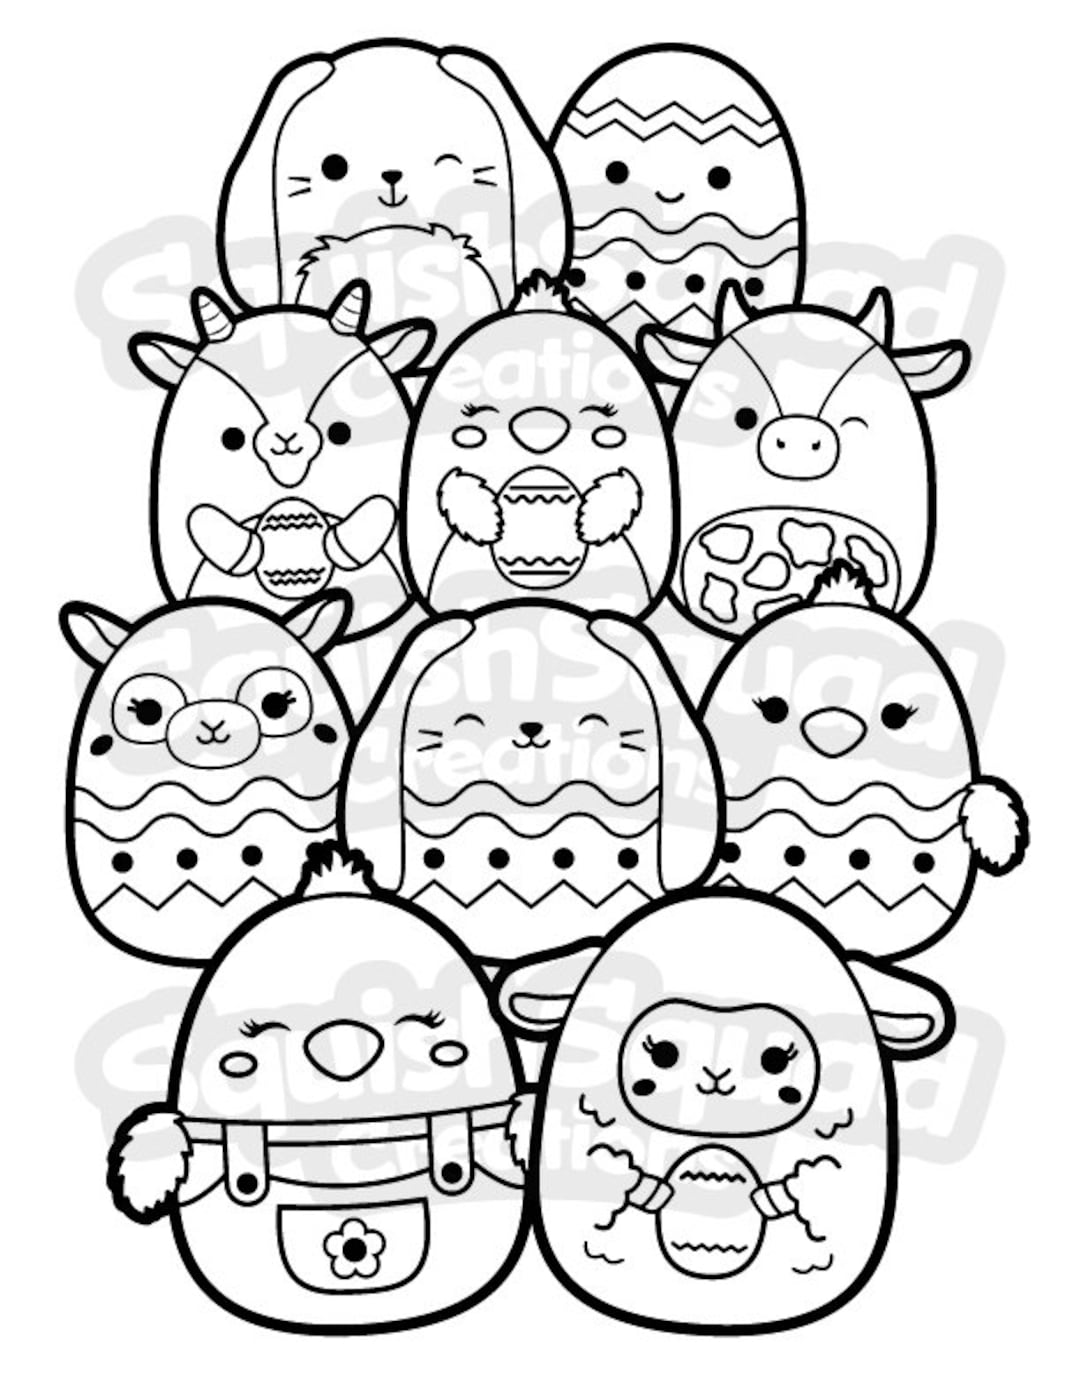 Squishmallow cute easter coloring page printable coloring page downloadable coloring sheet coloring page for kids